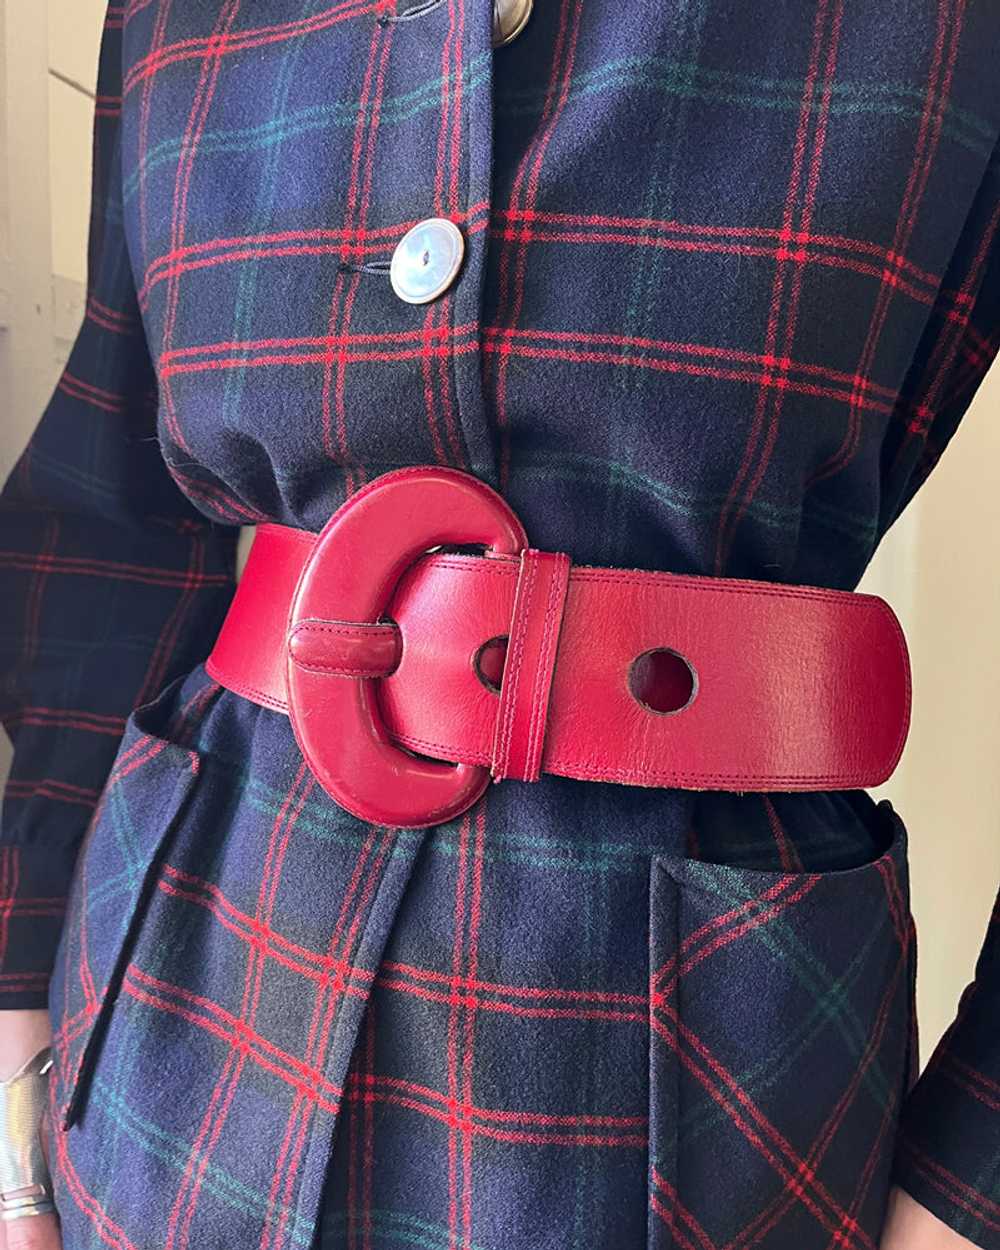 90s Wide Deep Red Leather Belt - image 2